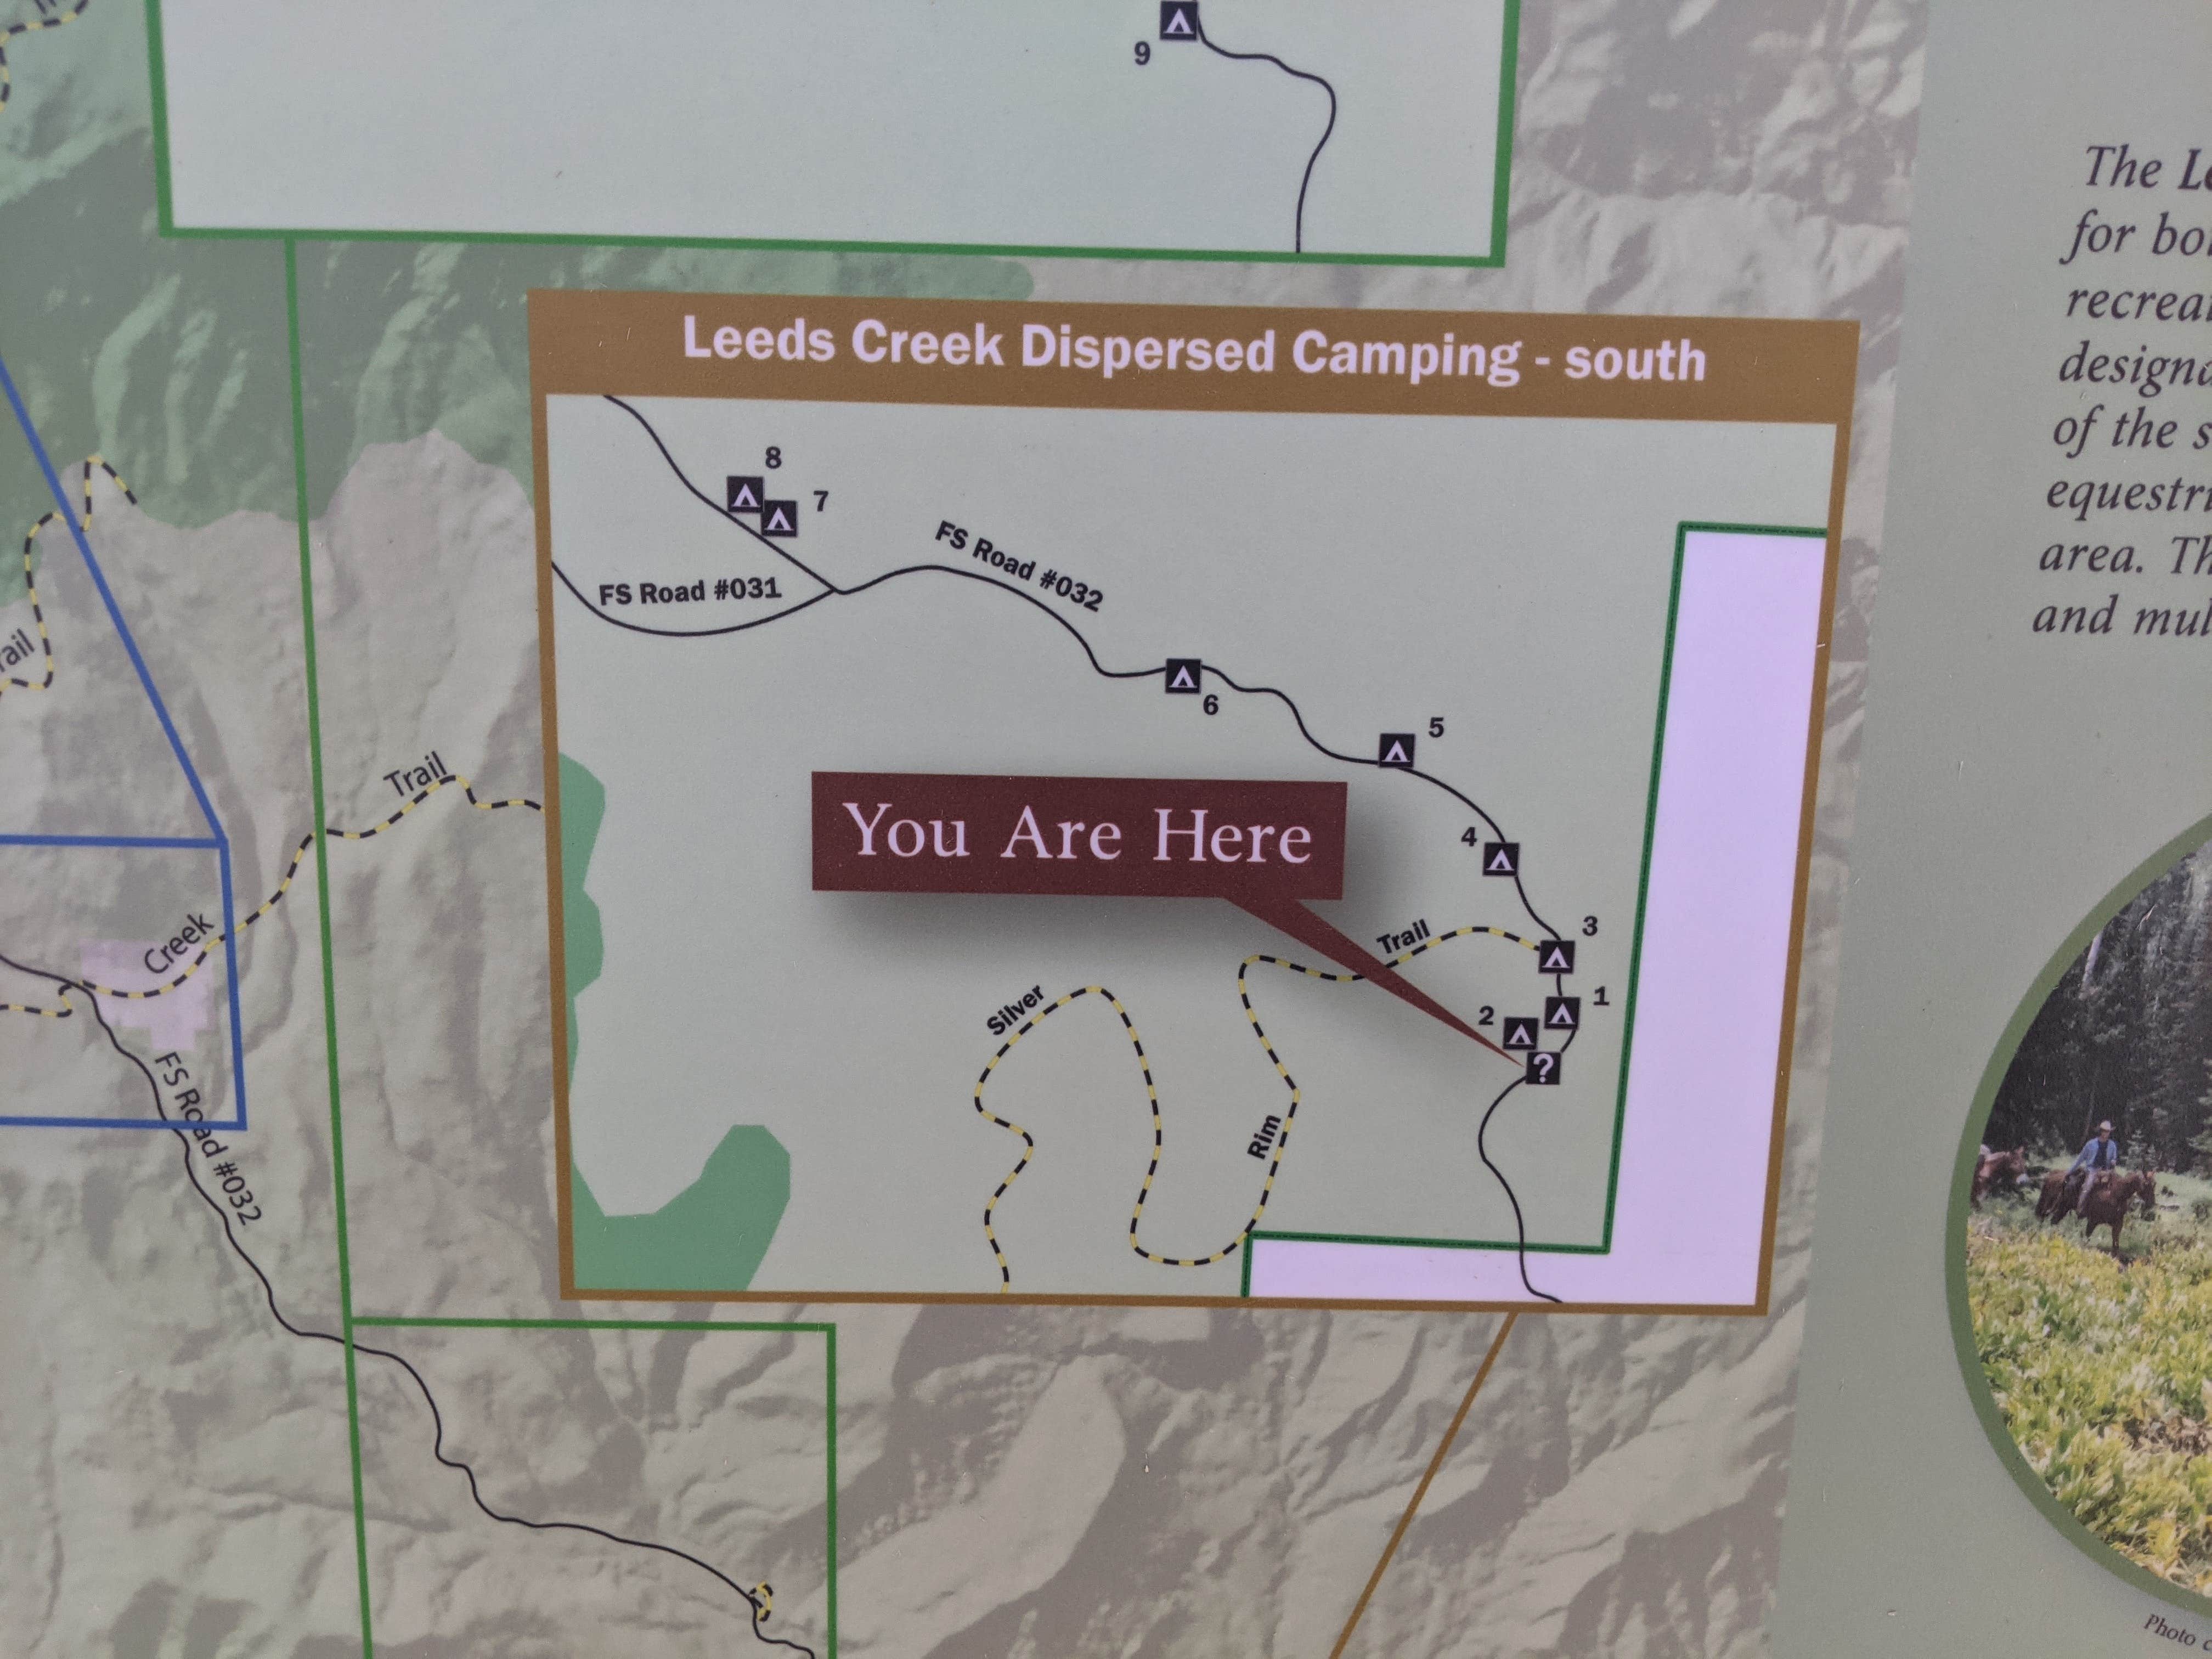 Camper submitted image from Leeds Canyon Dispersed #2 - 5